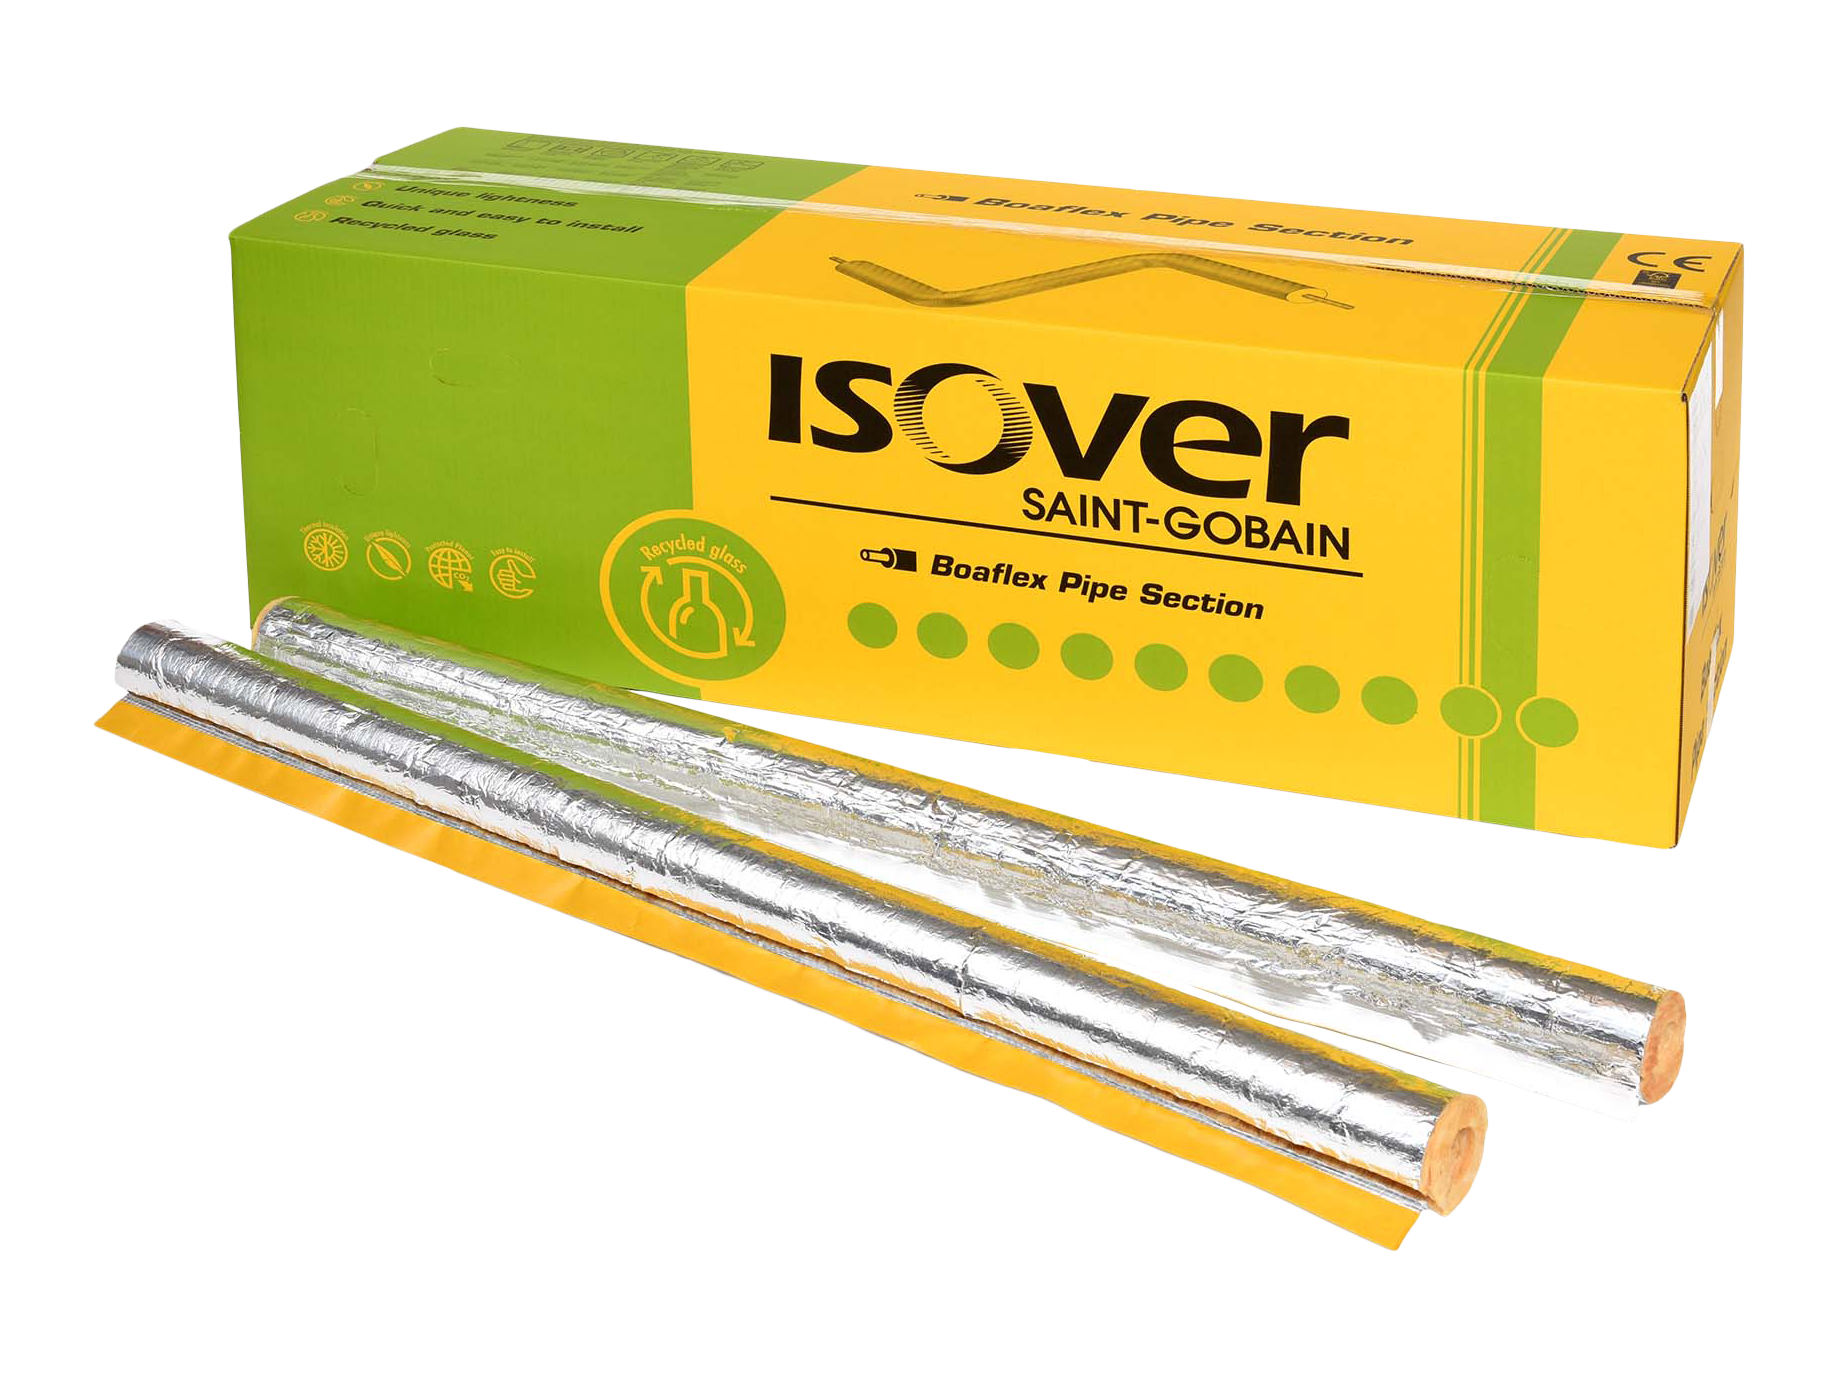 ISOVER Boaflex Pipe Section 42/30